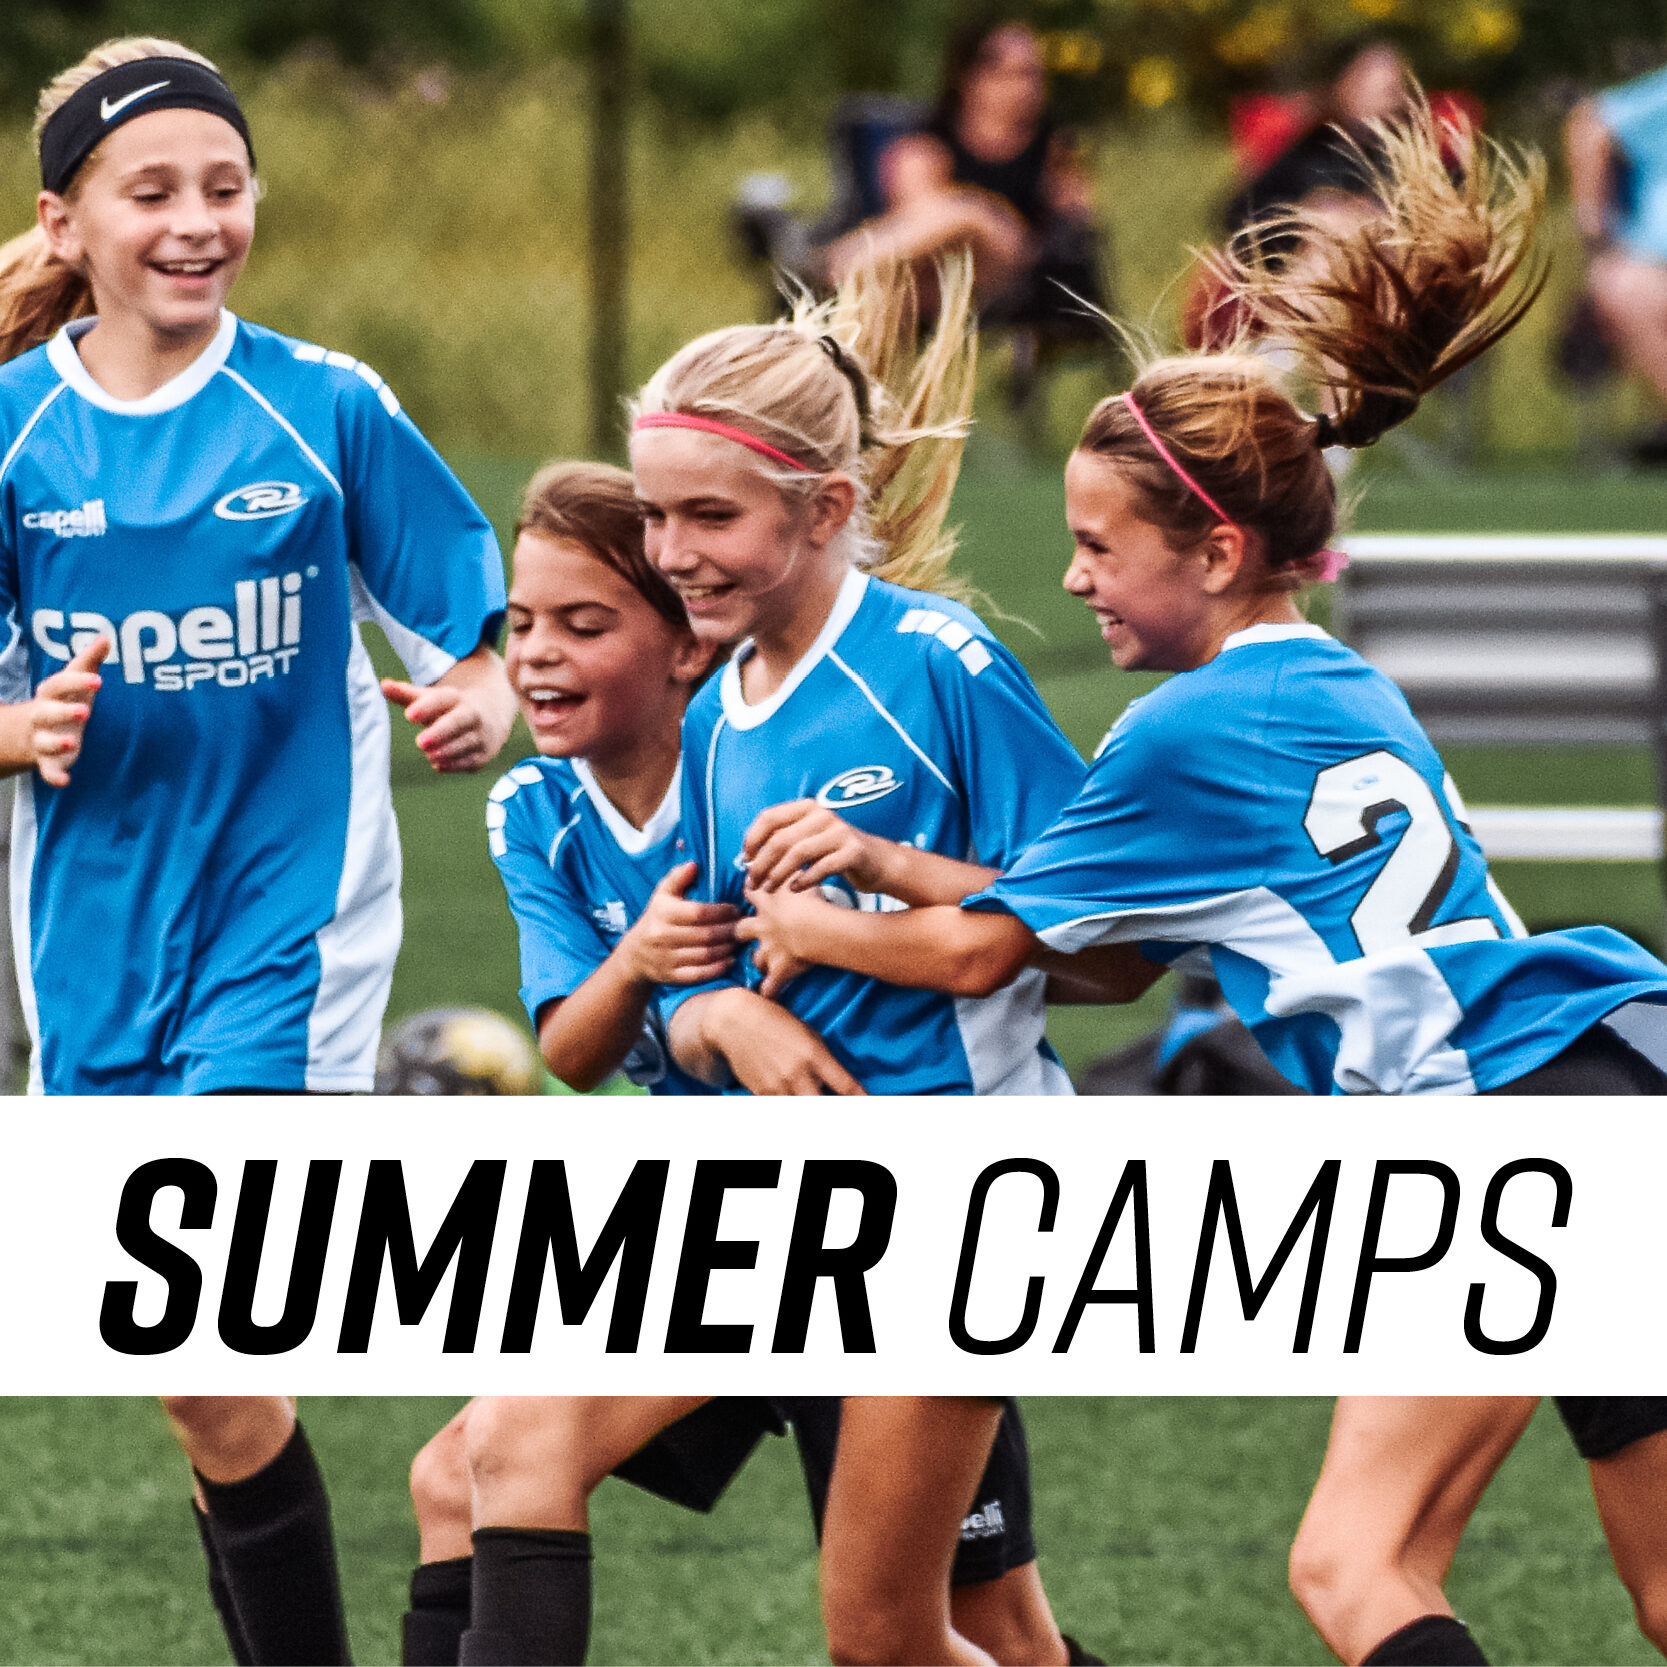 Summer Camps - G